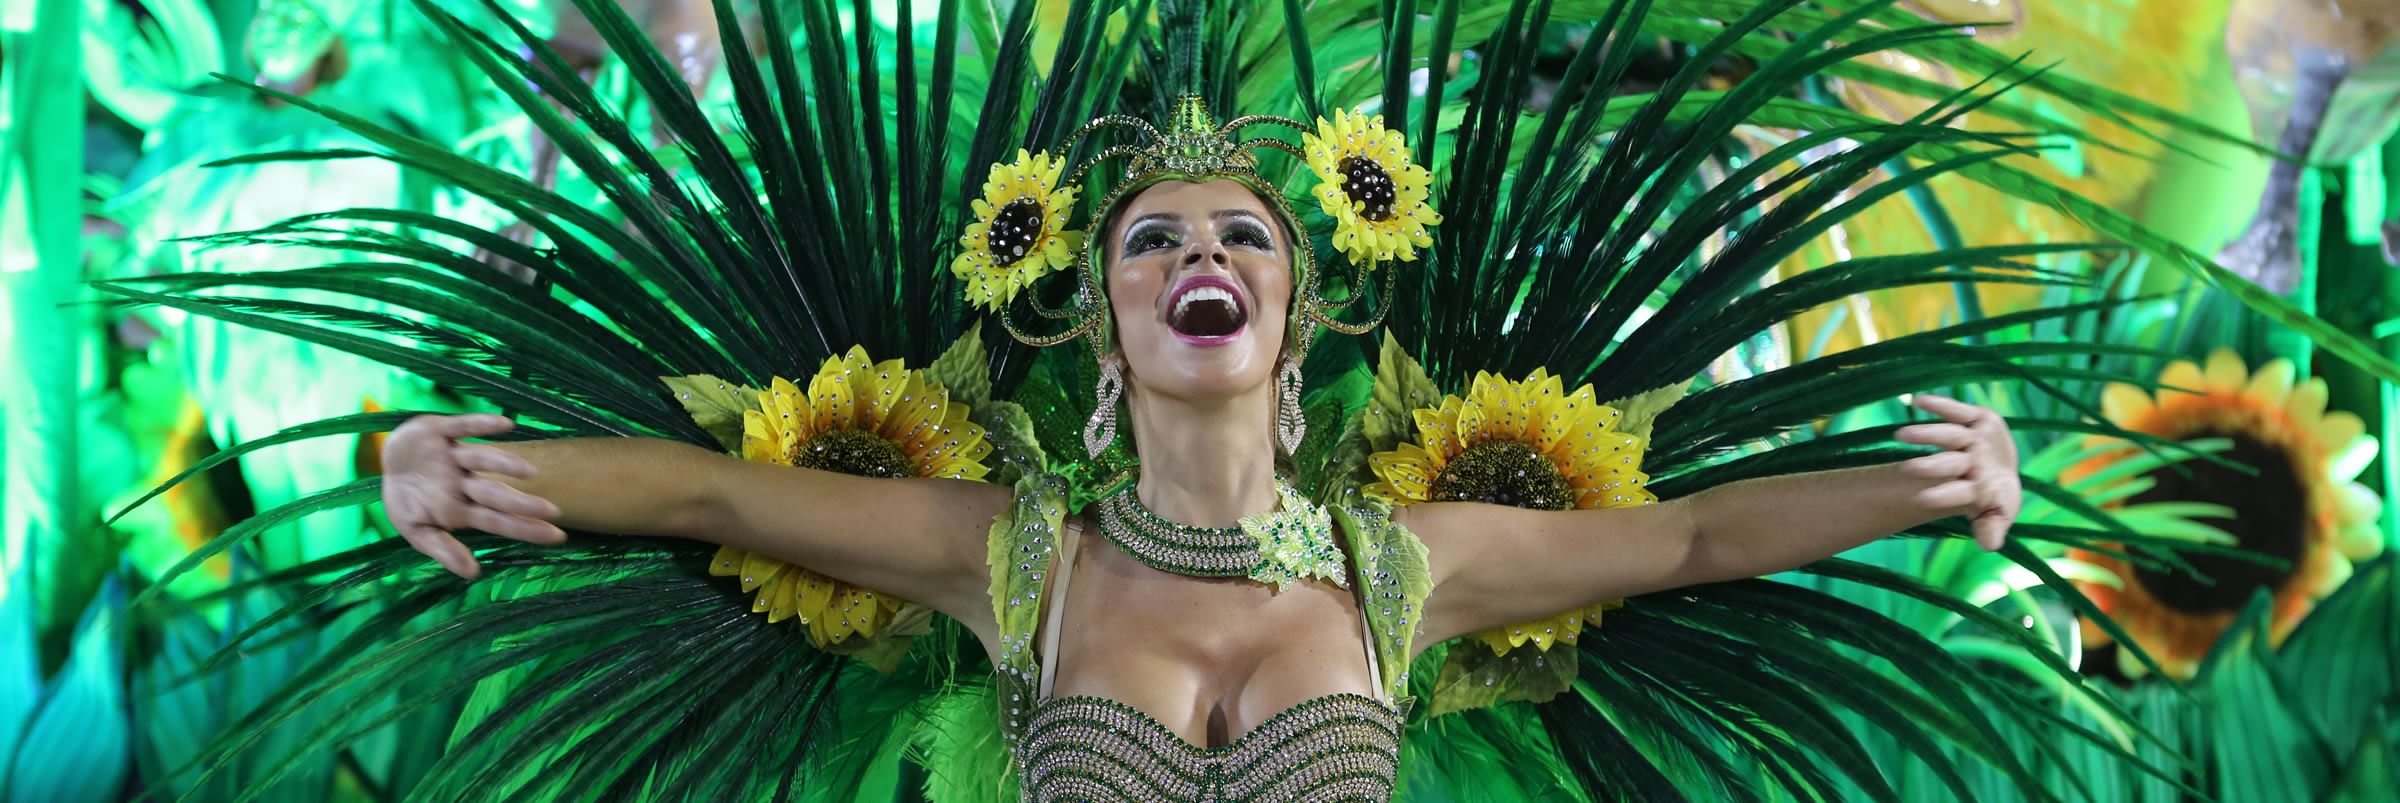 The Rio Carnival Winners Parade Audley Travel